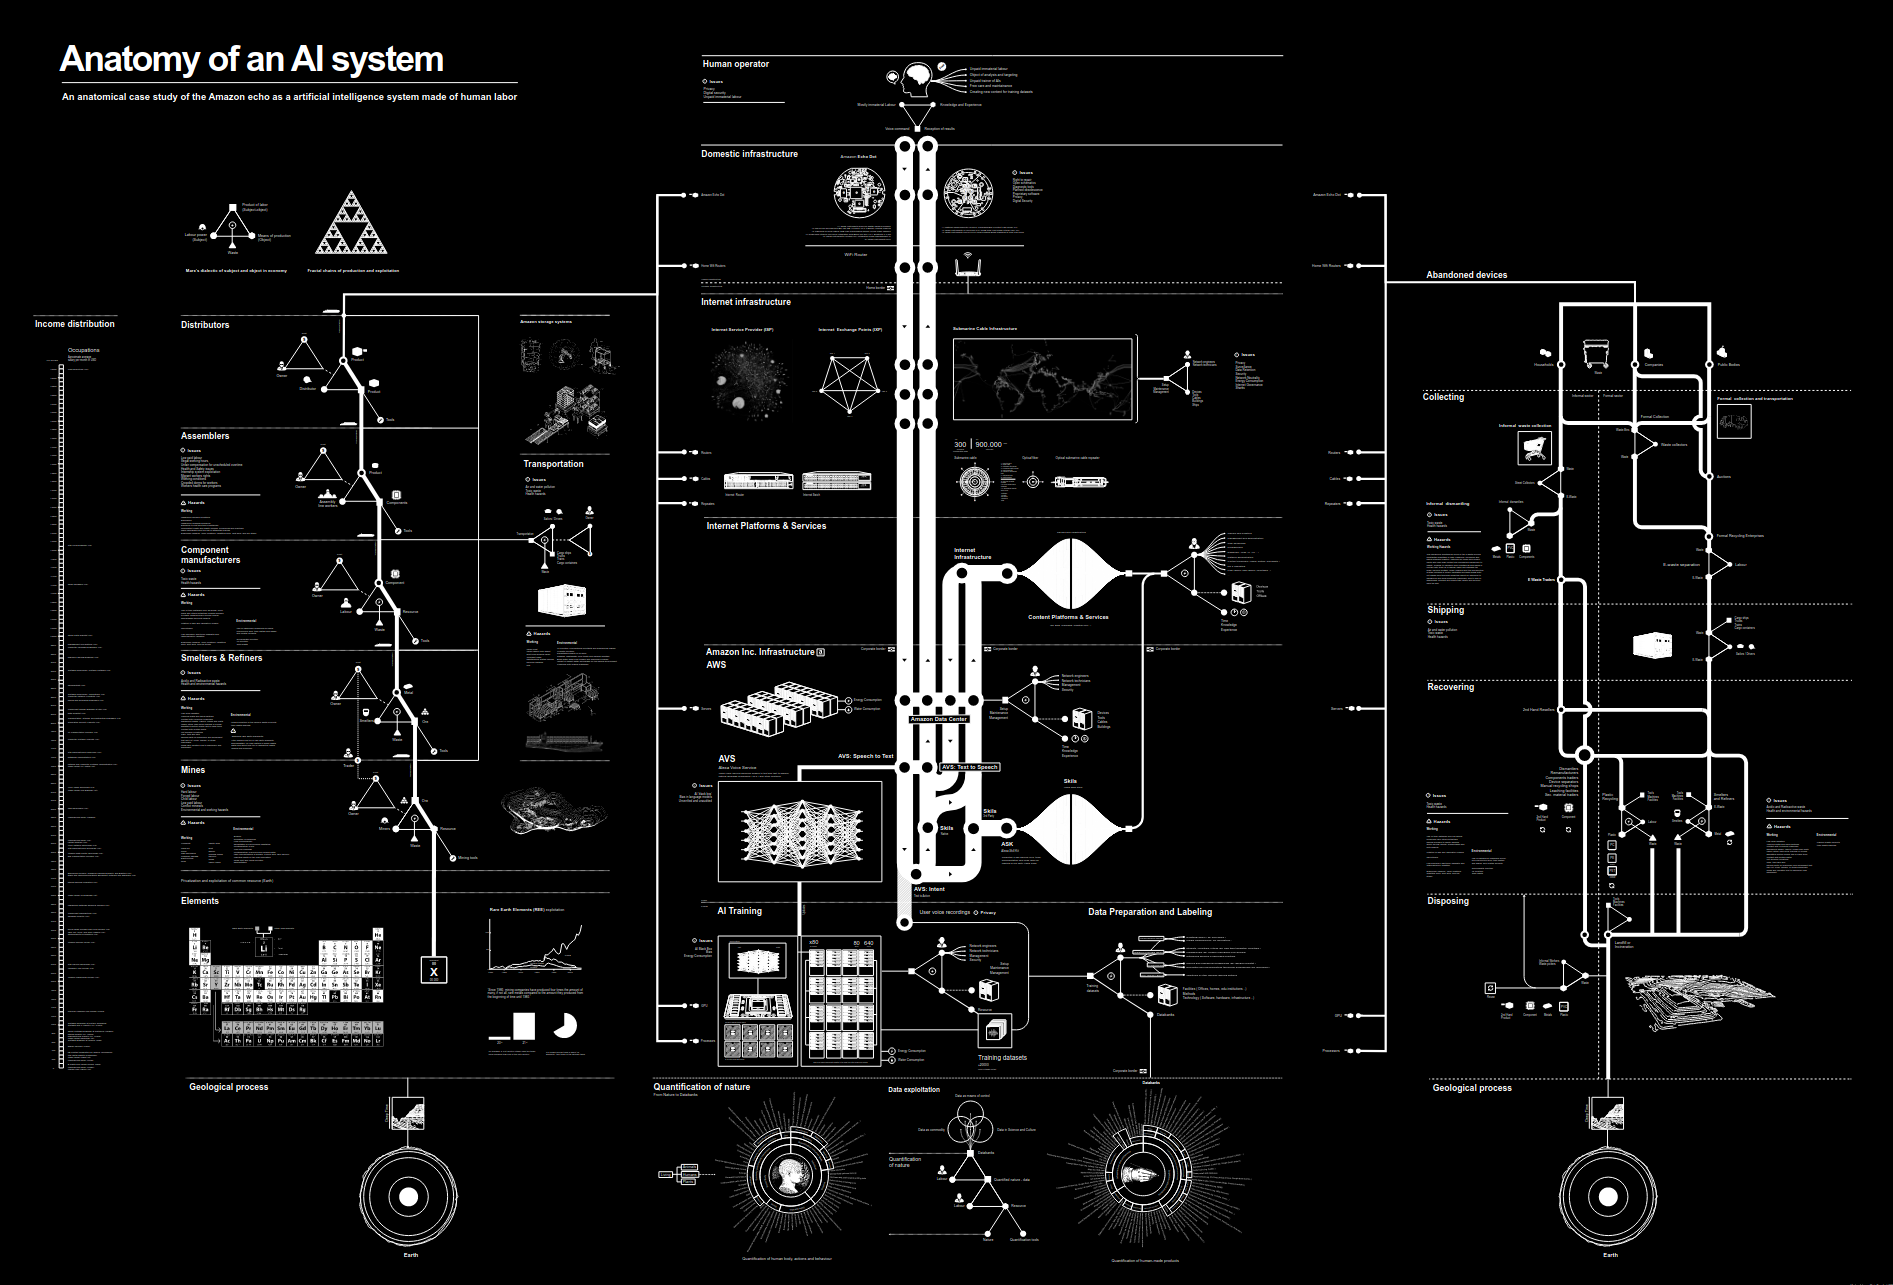 a detailed diagram of the human labor, data and planetary resources used in Amazon Echo's AI system